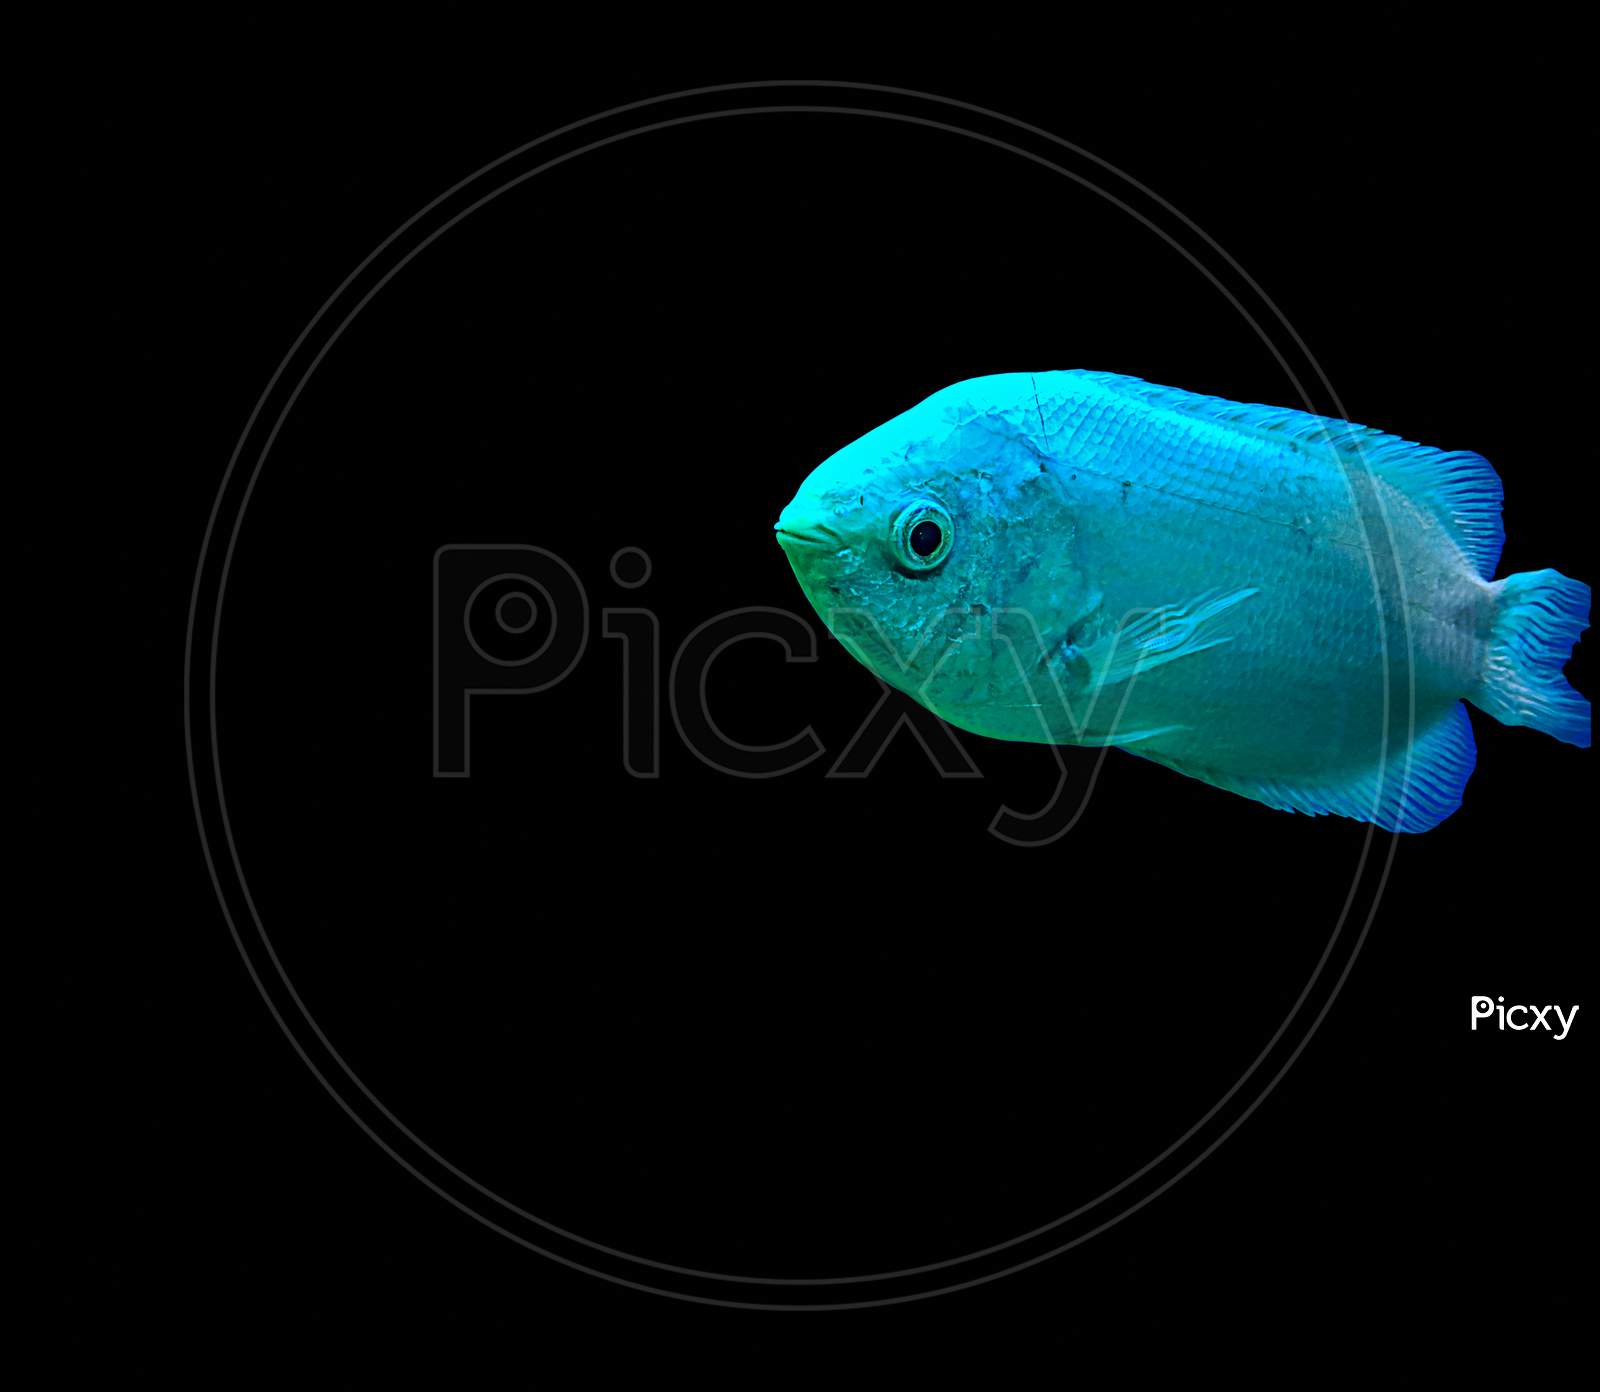 Kissing Gourami (Helostoma Temminckii), Also Known As The Kissing Fish Isolated On Black Background.